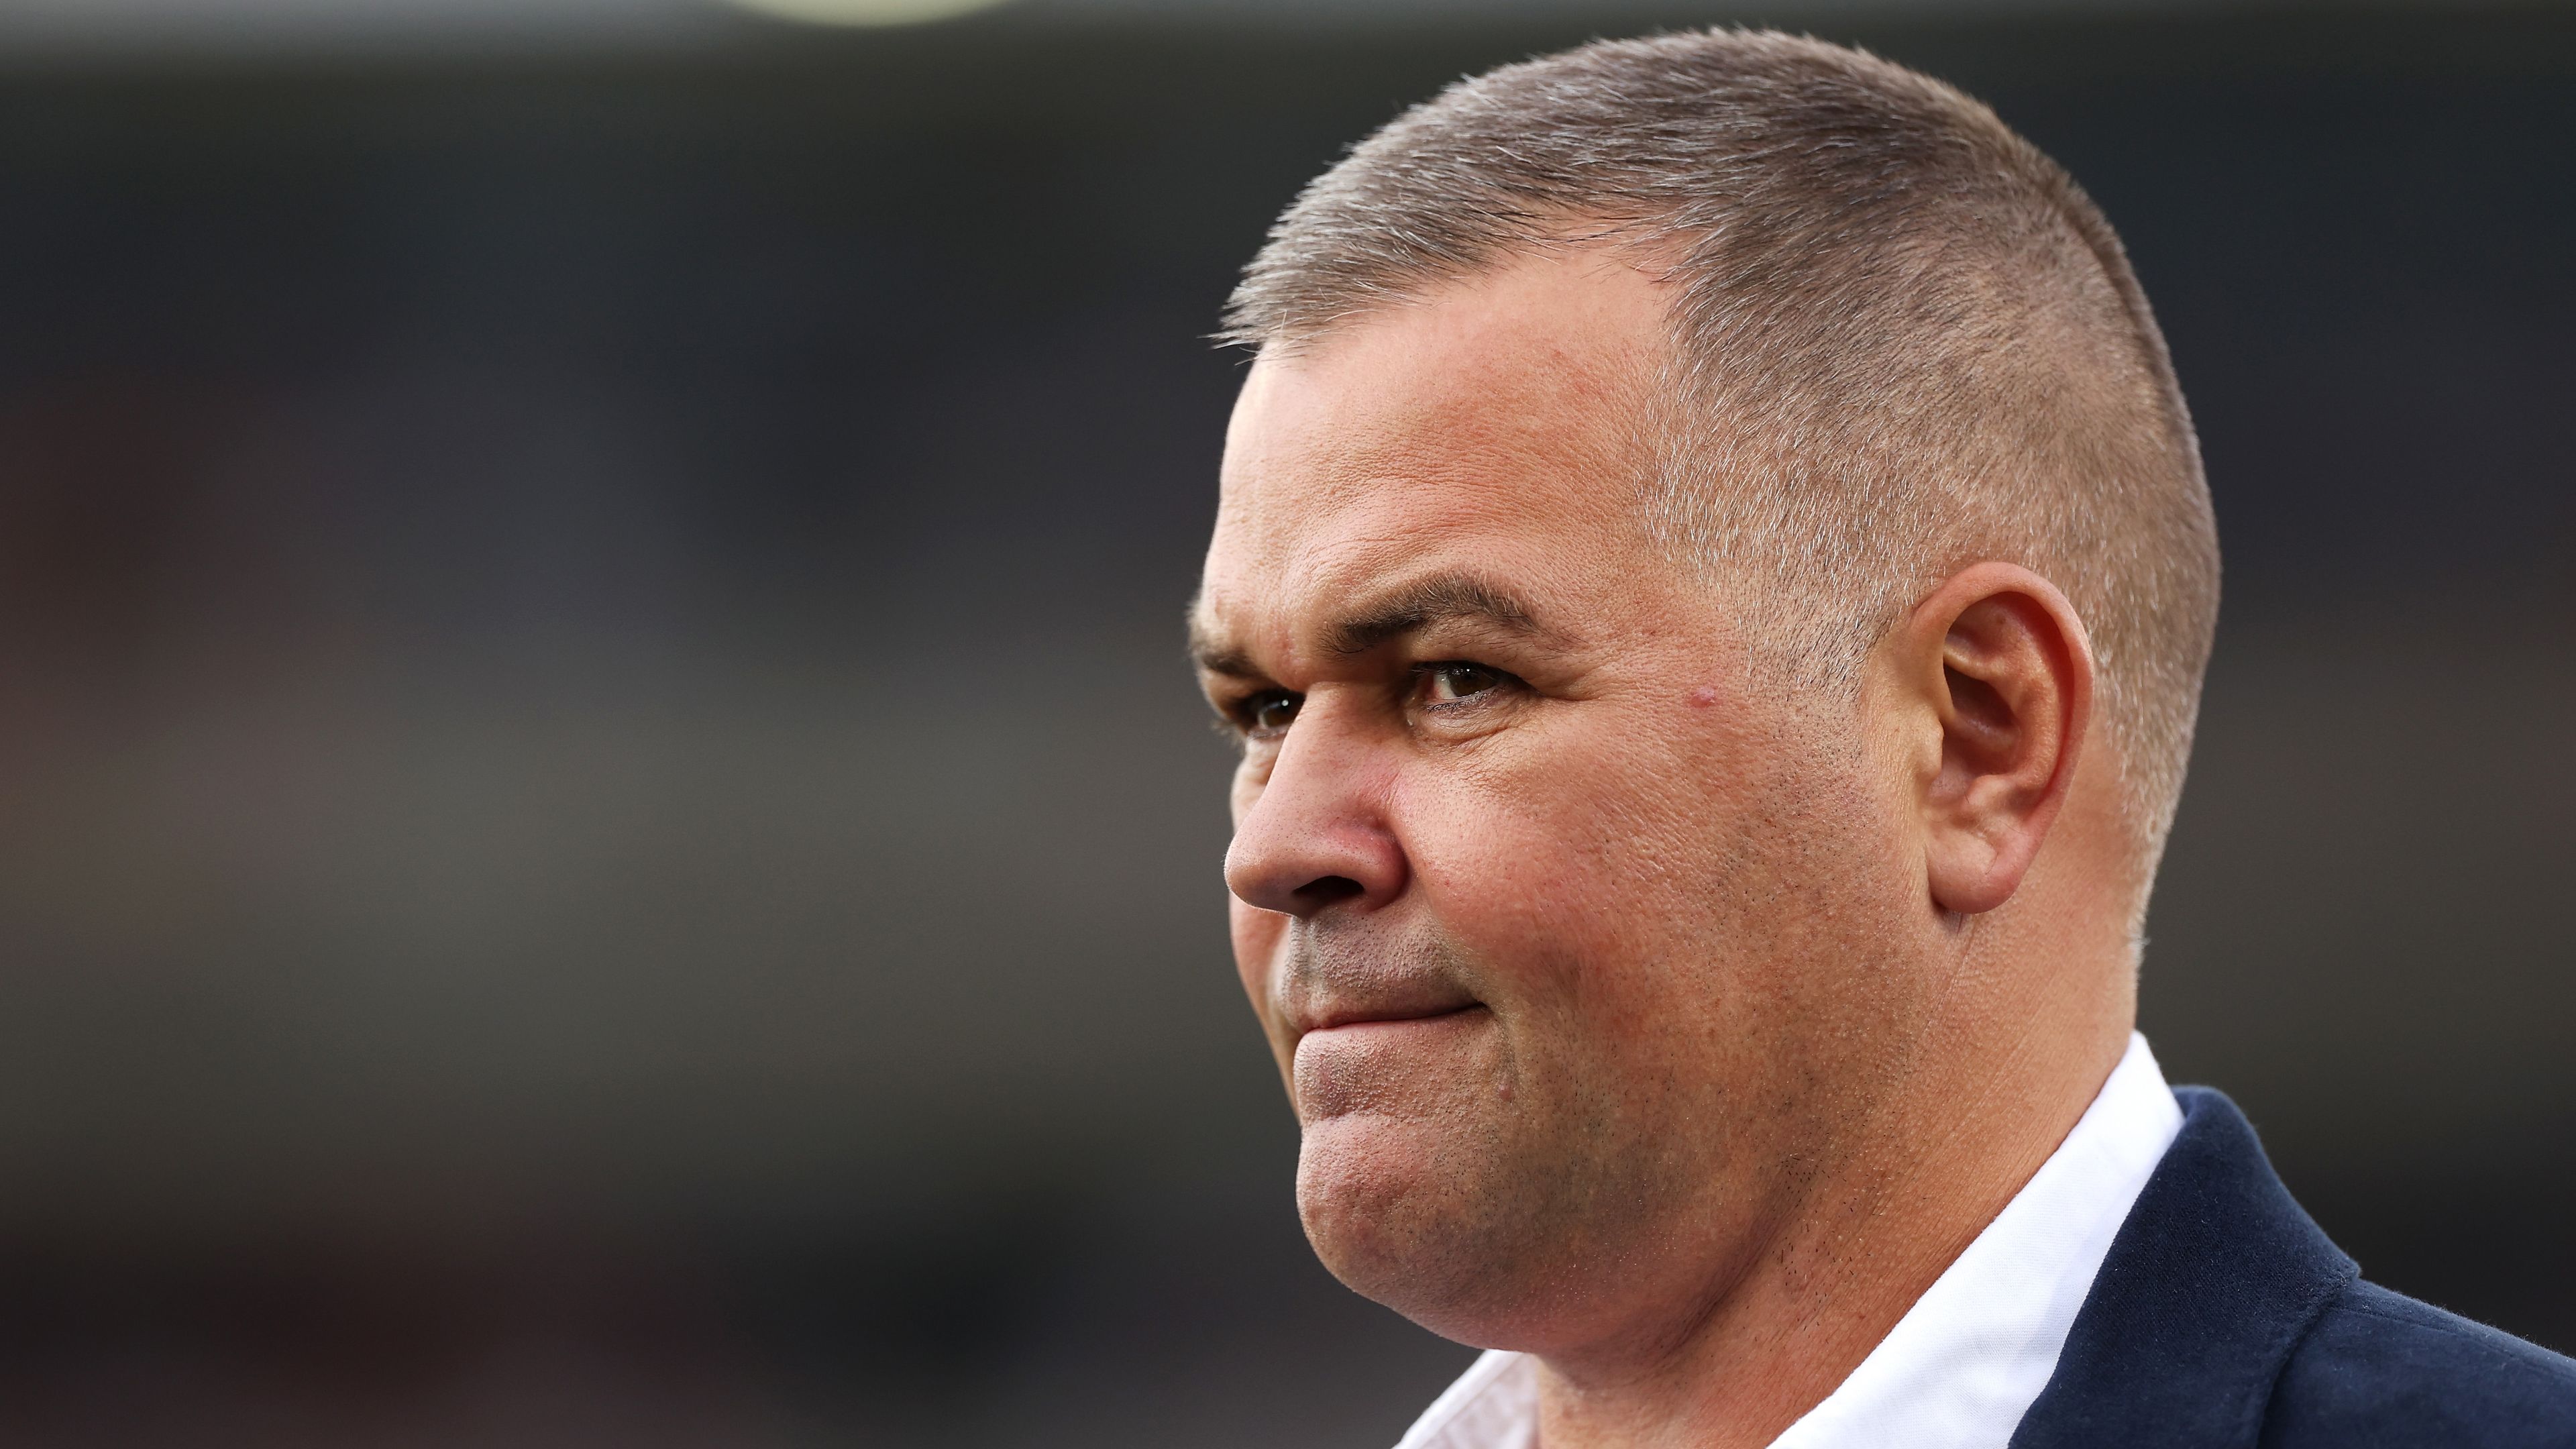 Sea Eagles coach Anthony Seibold looks on as he is is interviewed pre-game during the round eight NRL match between Wests Tigers and Manly Sea Eagles at Campbelltown Stadium on April 23, 2023 in Sydney, Australia. (Photo by Mark Kolbe/Getty Images)